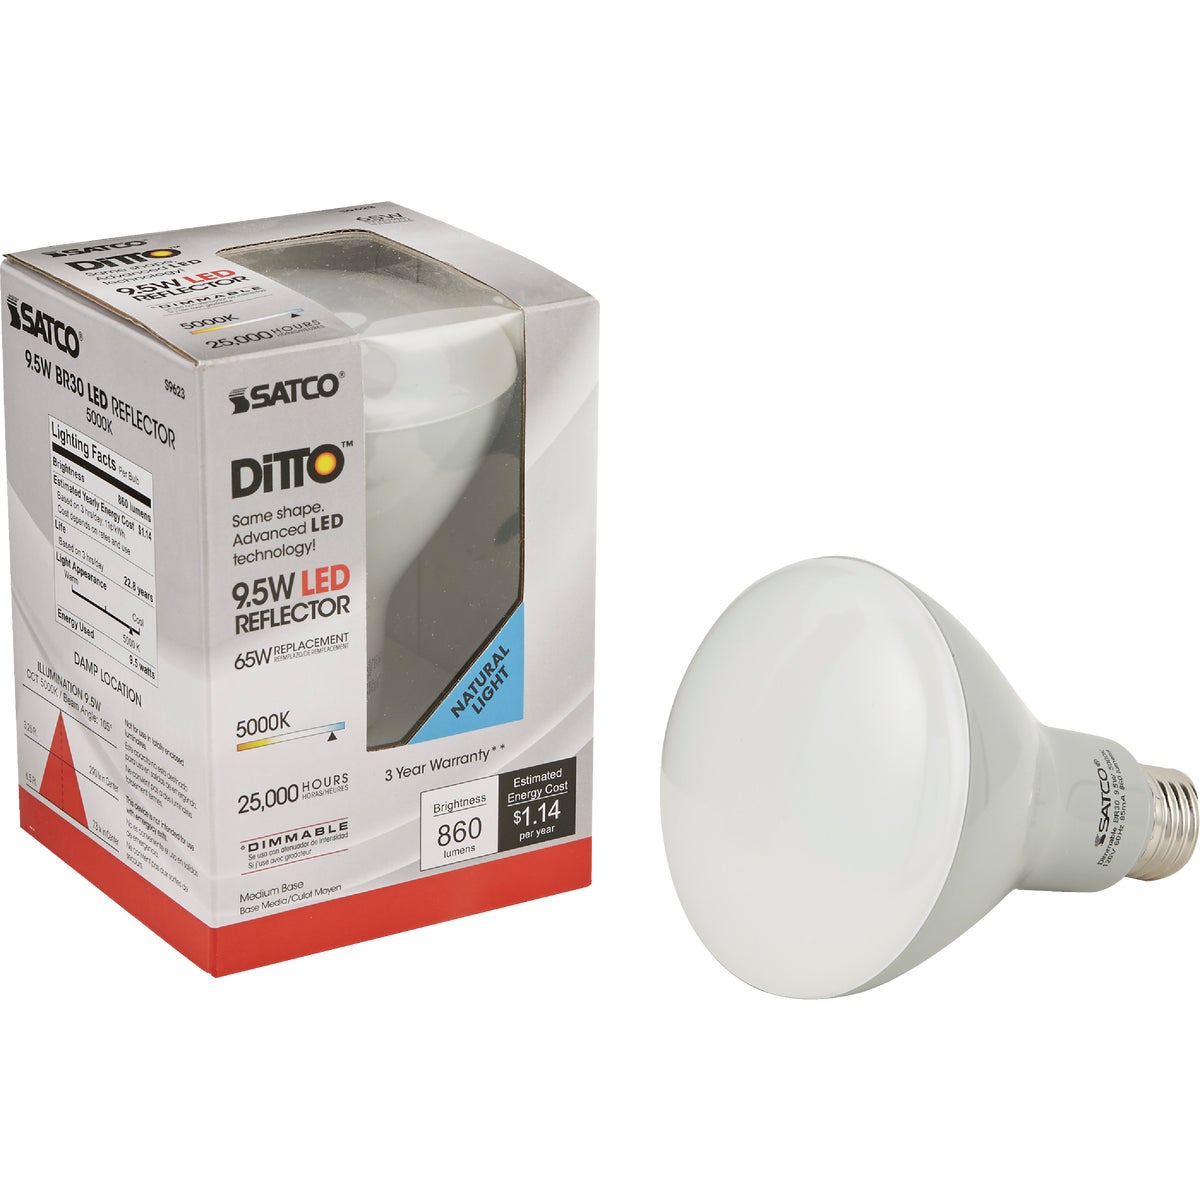 Satco Ditto 65W Equivalent Natural Light BR30 Medium Dimmable LED Floodlight Light Bulb